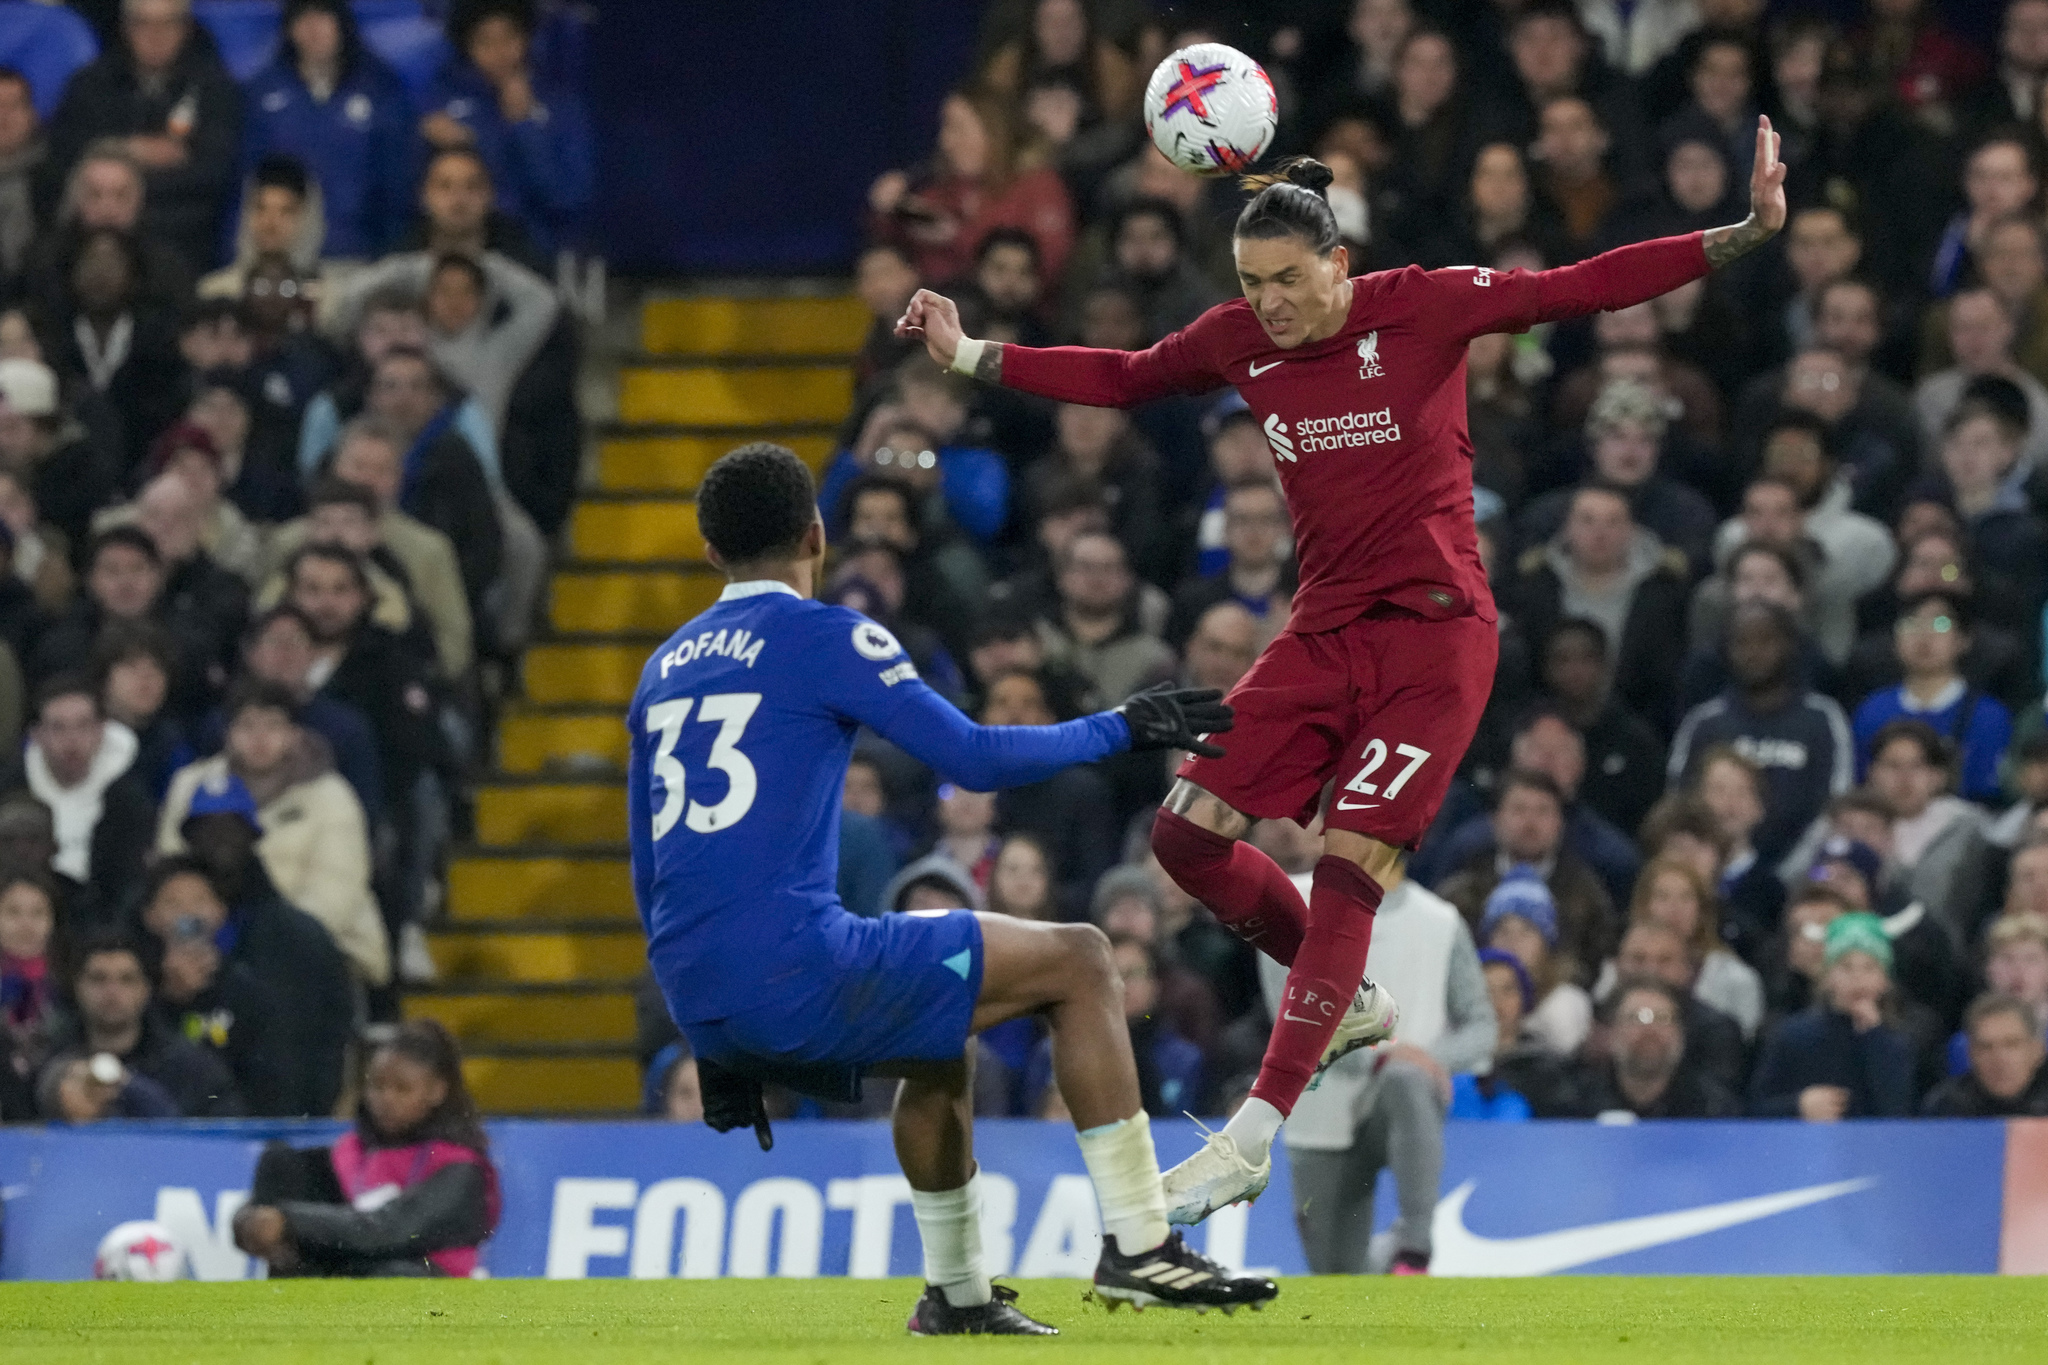 Liverpool's Darwin Nunez, right, duels for the ball with  lt;HIT gt;Chelsea lt;/HIT gt;'s Wesley Fofana during the English Premier League soccer match between  lt;HIT gt;Chelsea lt;/HIT gt; and Liverpool at Stamford Bridge stadium in London, Tuesday, April 4, 2023. (AP Photo/Frank Augstein)